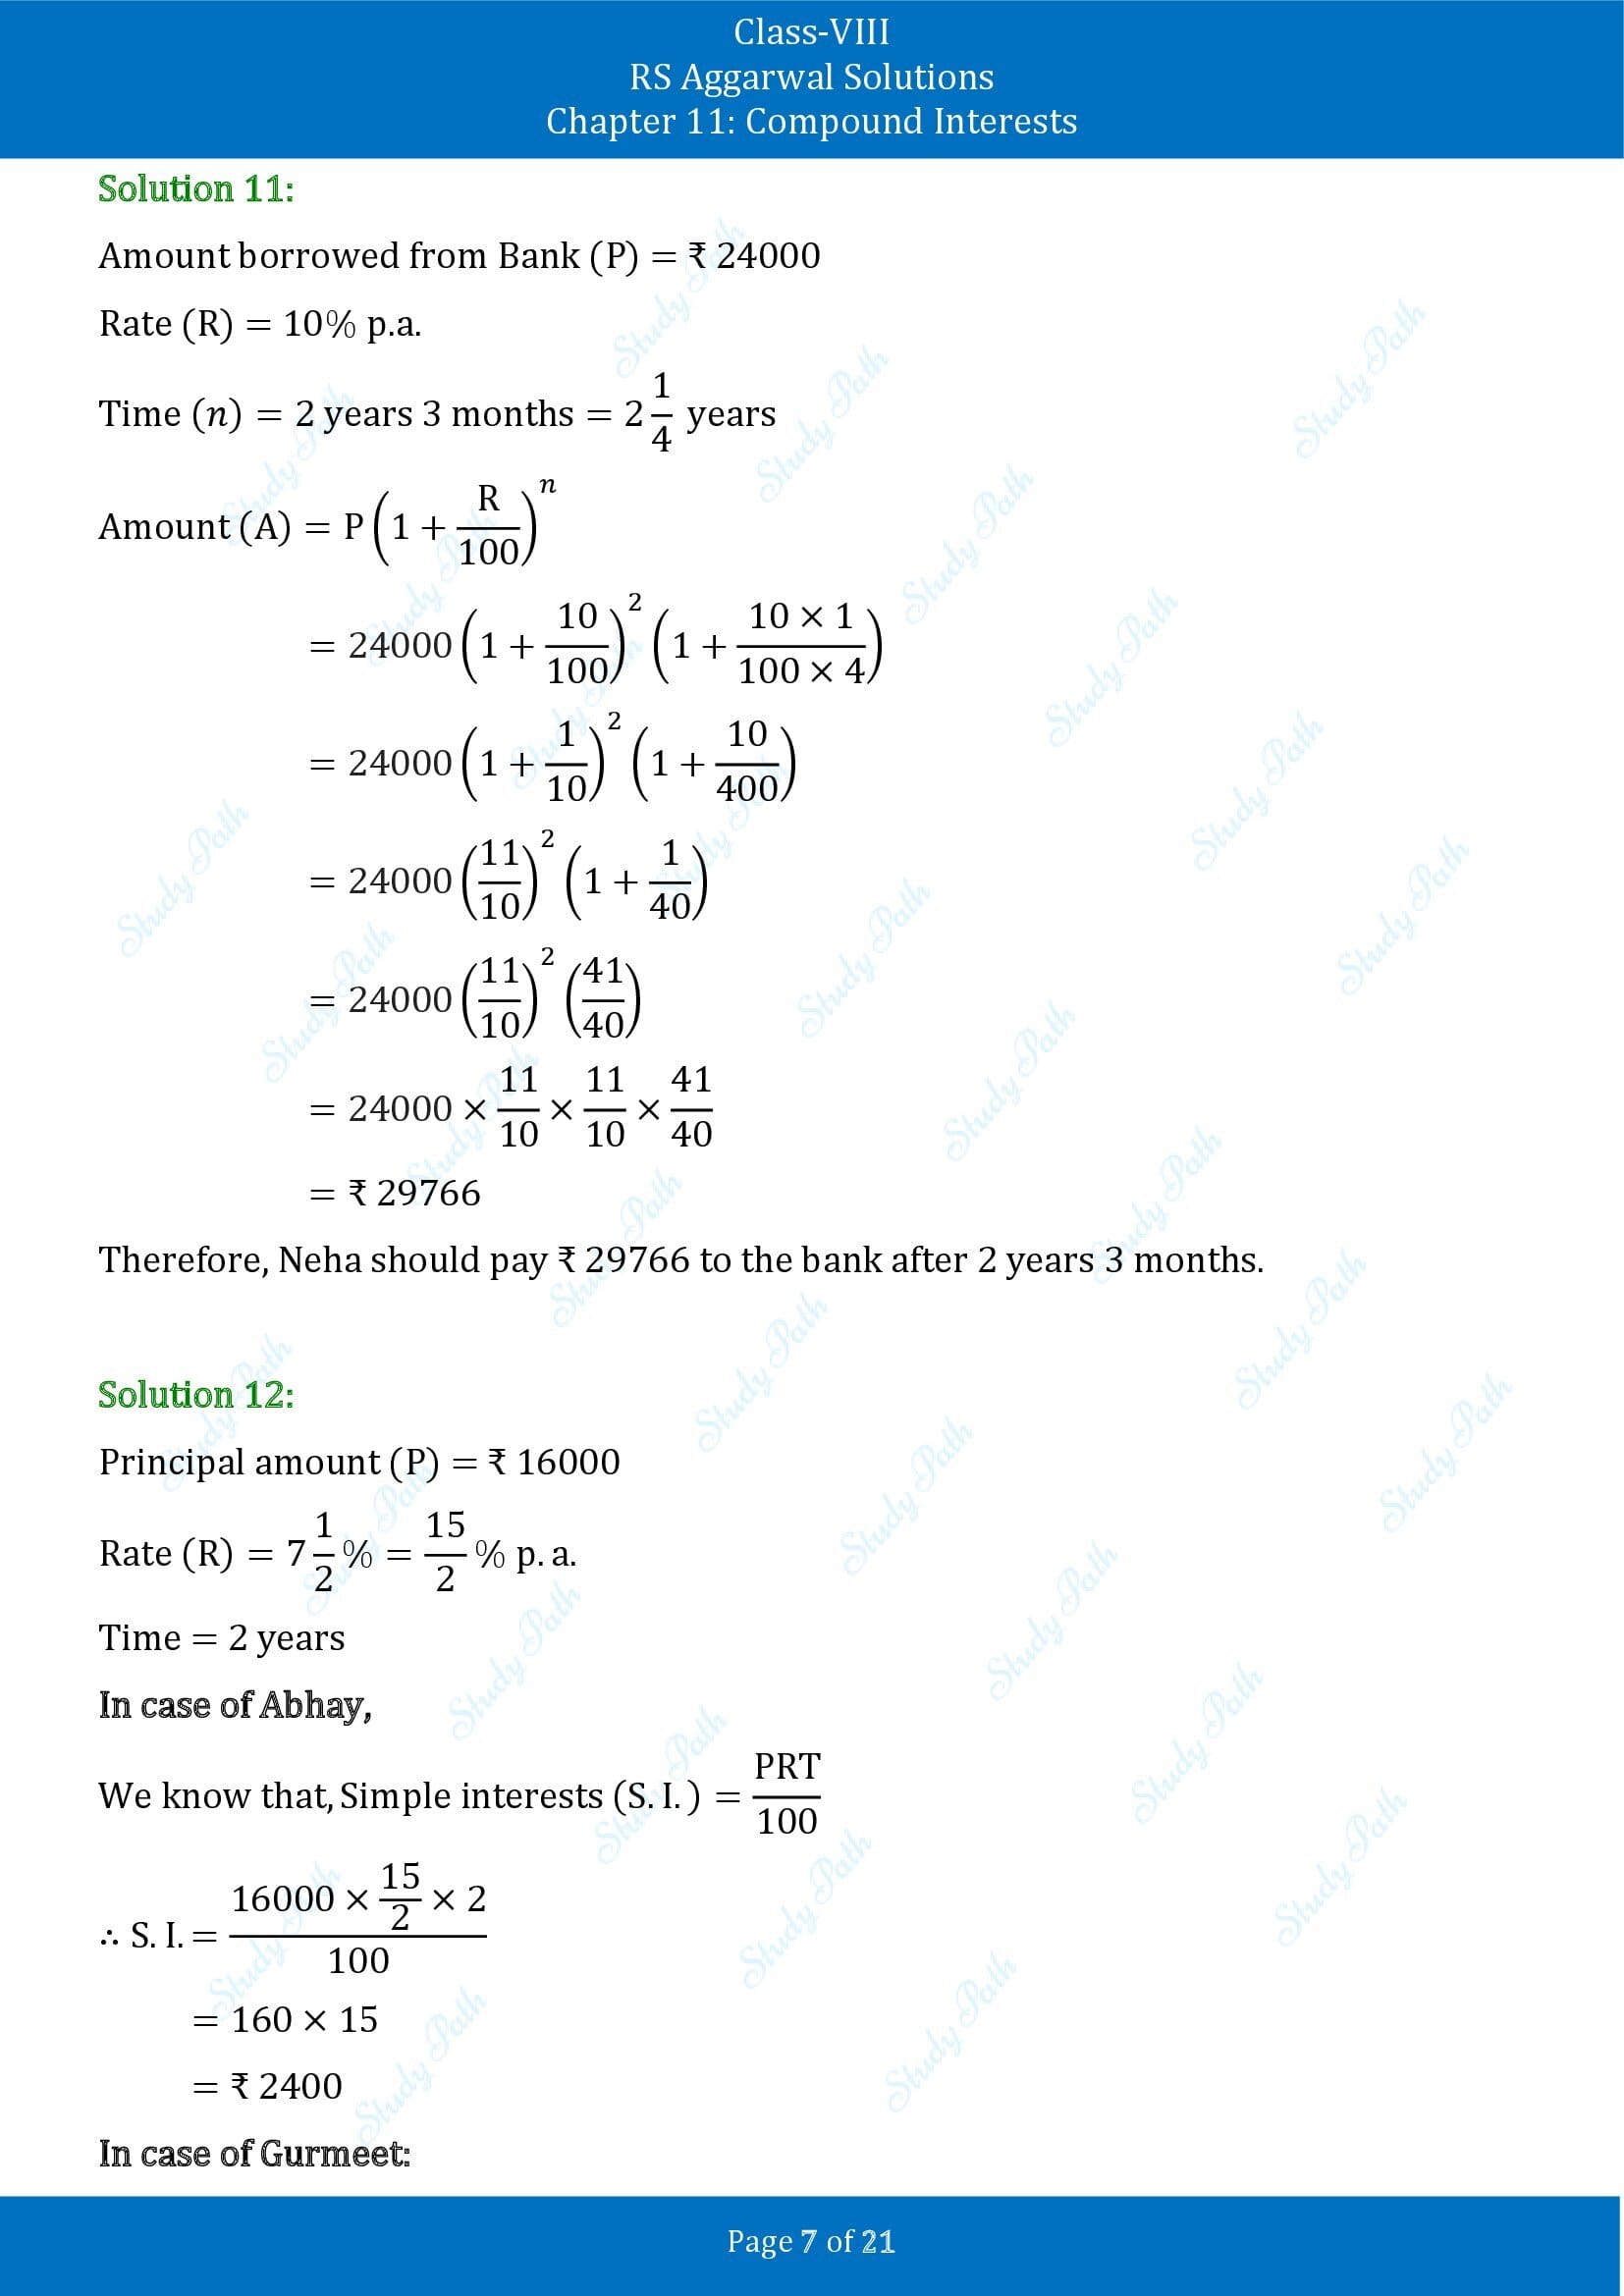 RS Aggarwal Solutions Class 8 Chapter 11 Compound Interests Exercise 11B 00007